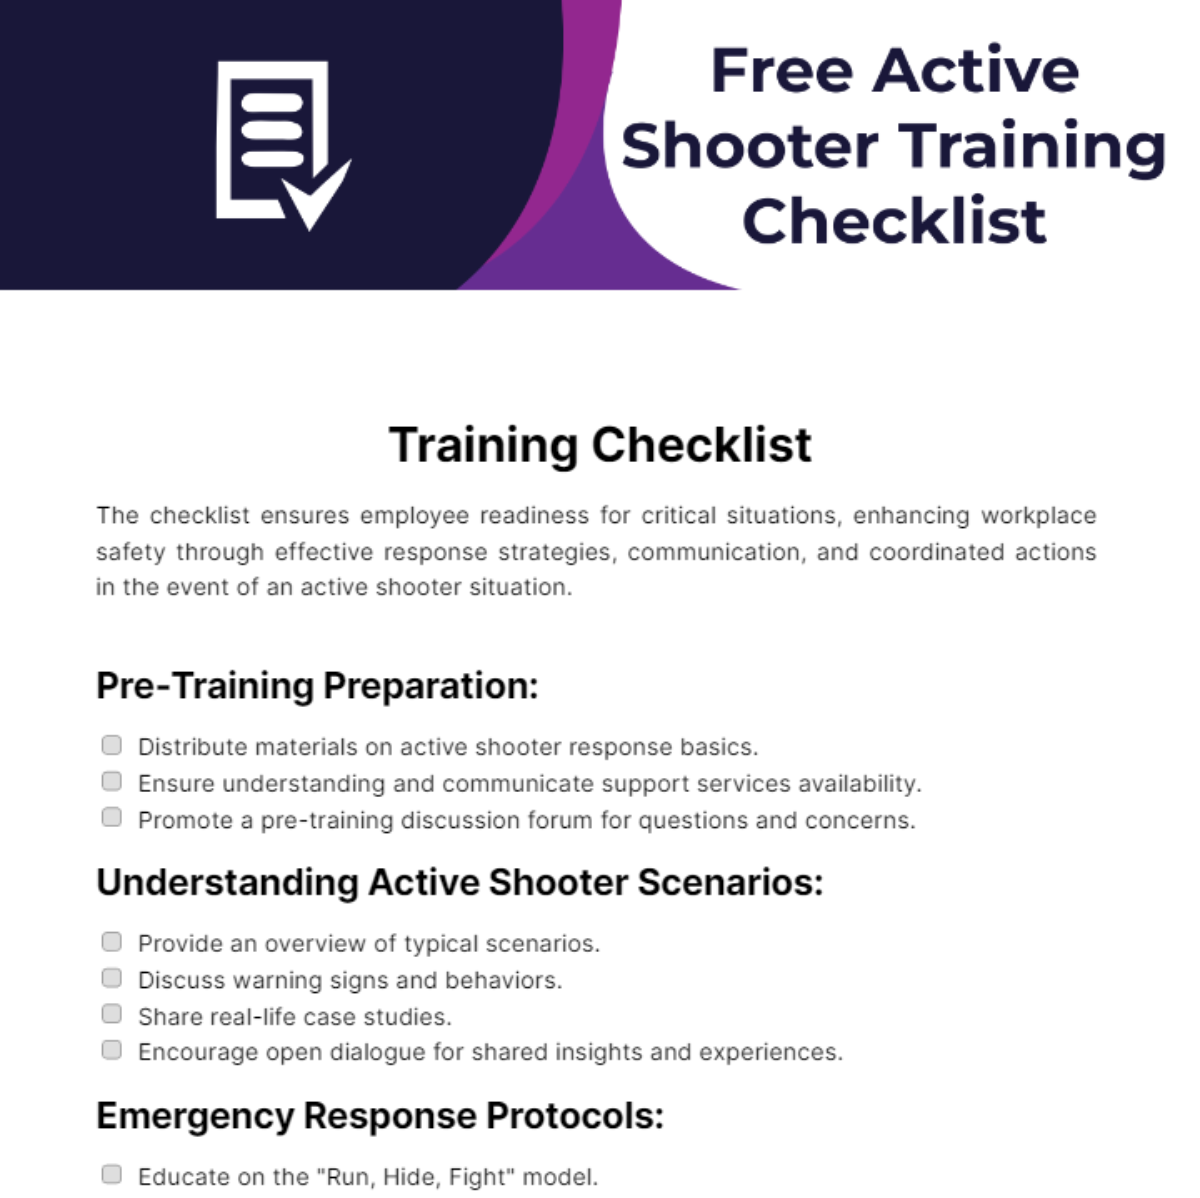 Free Active Shooter Training Checklist Template